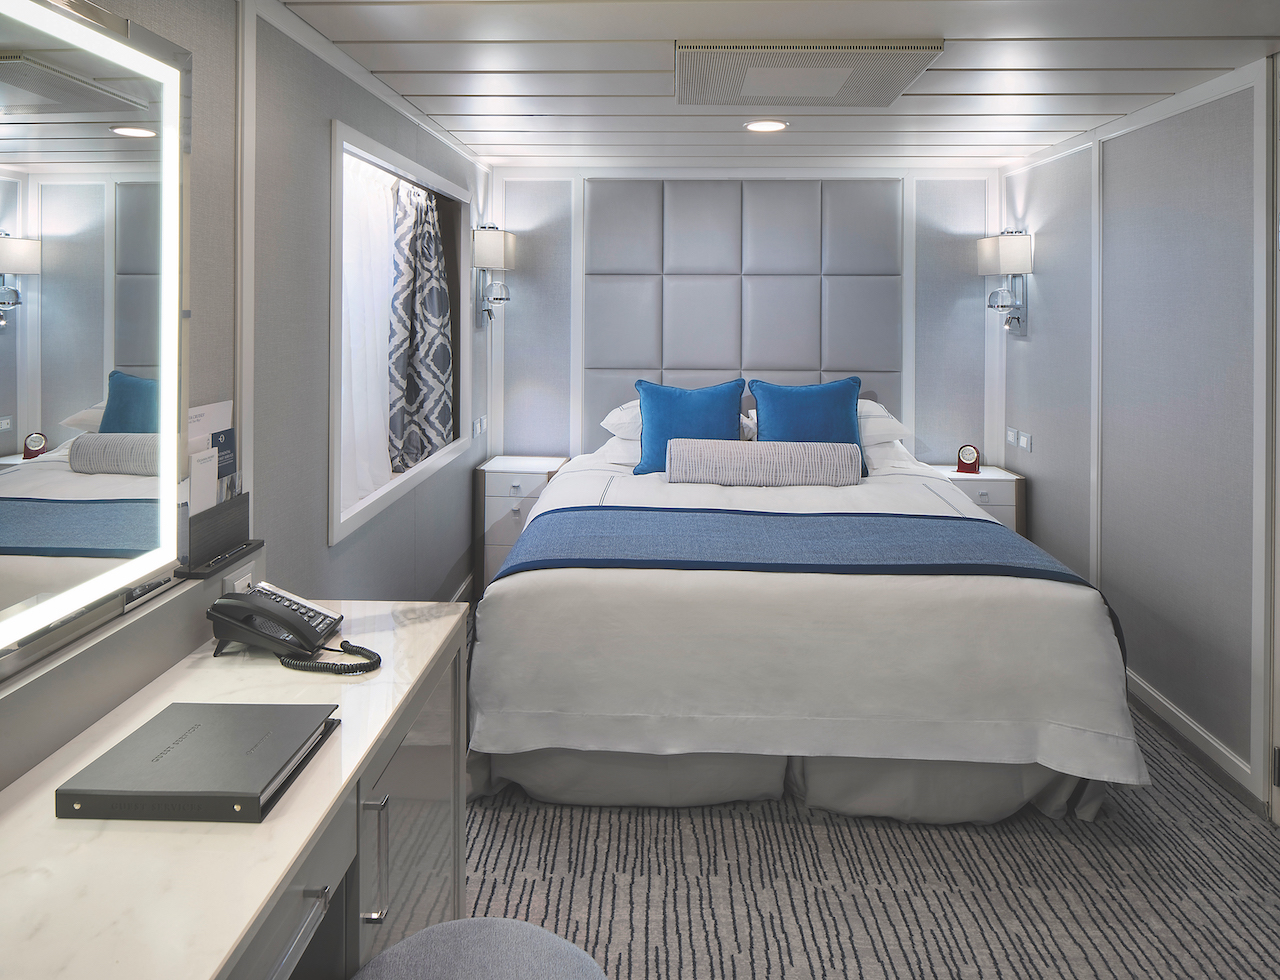 Oceania Cruises has created dozens of new dedicated staterooms for solo travelers to coincide with the debut of the line's Go Green and Beyond Blueprints shore excursion series. 